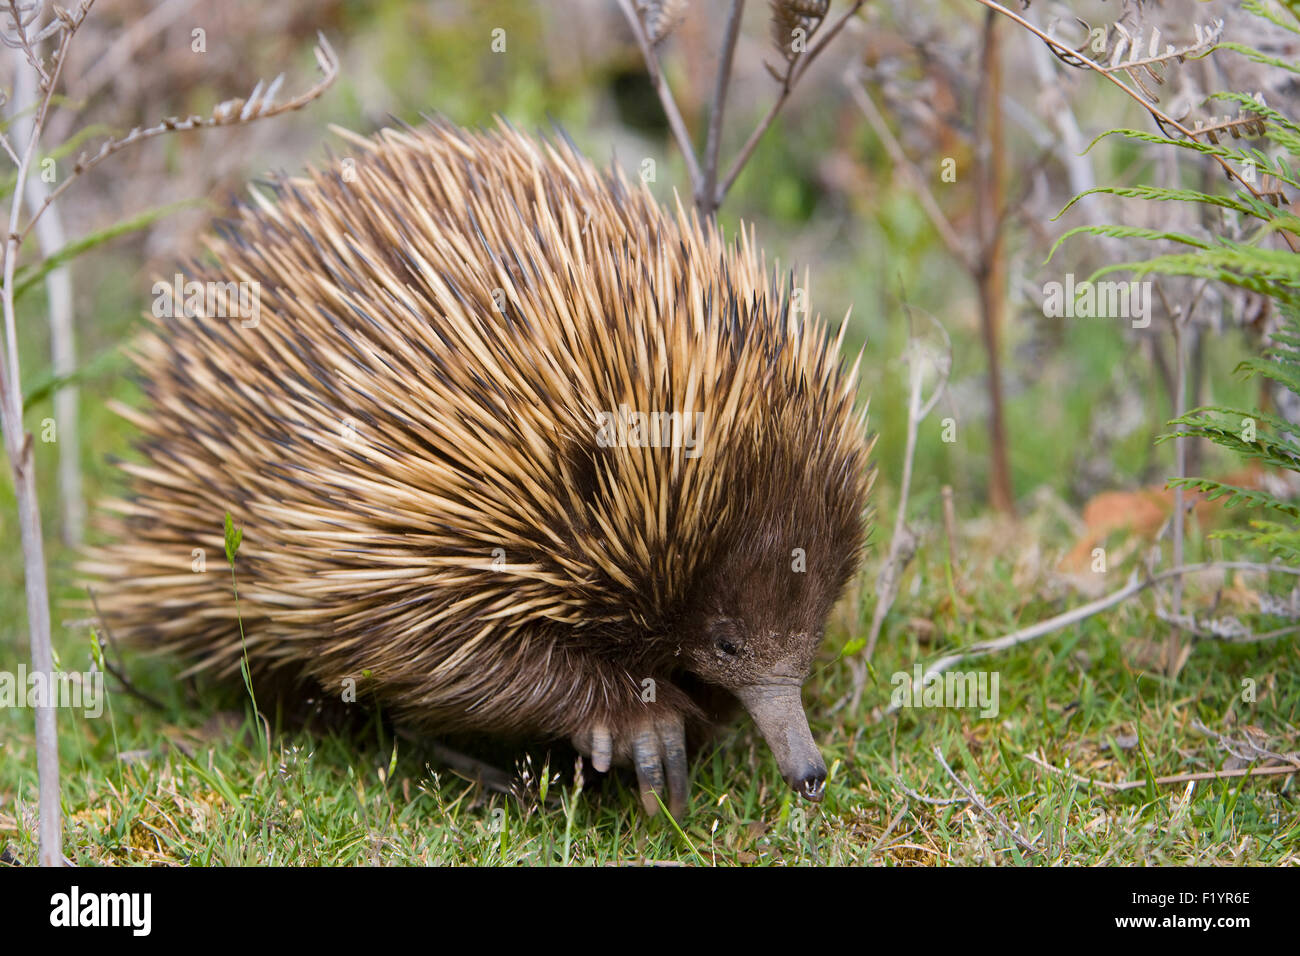 Short-beaked Echidna Spiny Anteater (Tachyglossus aculeatus) Adult ...